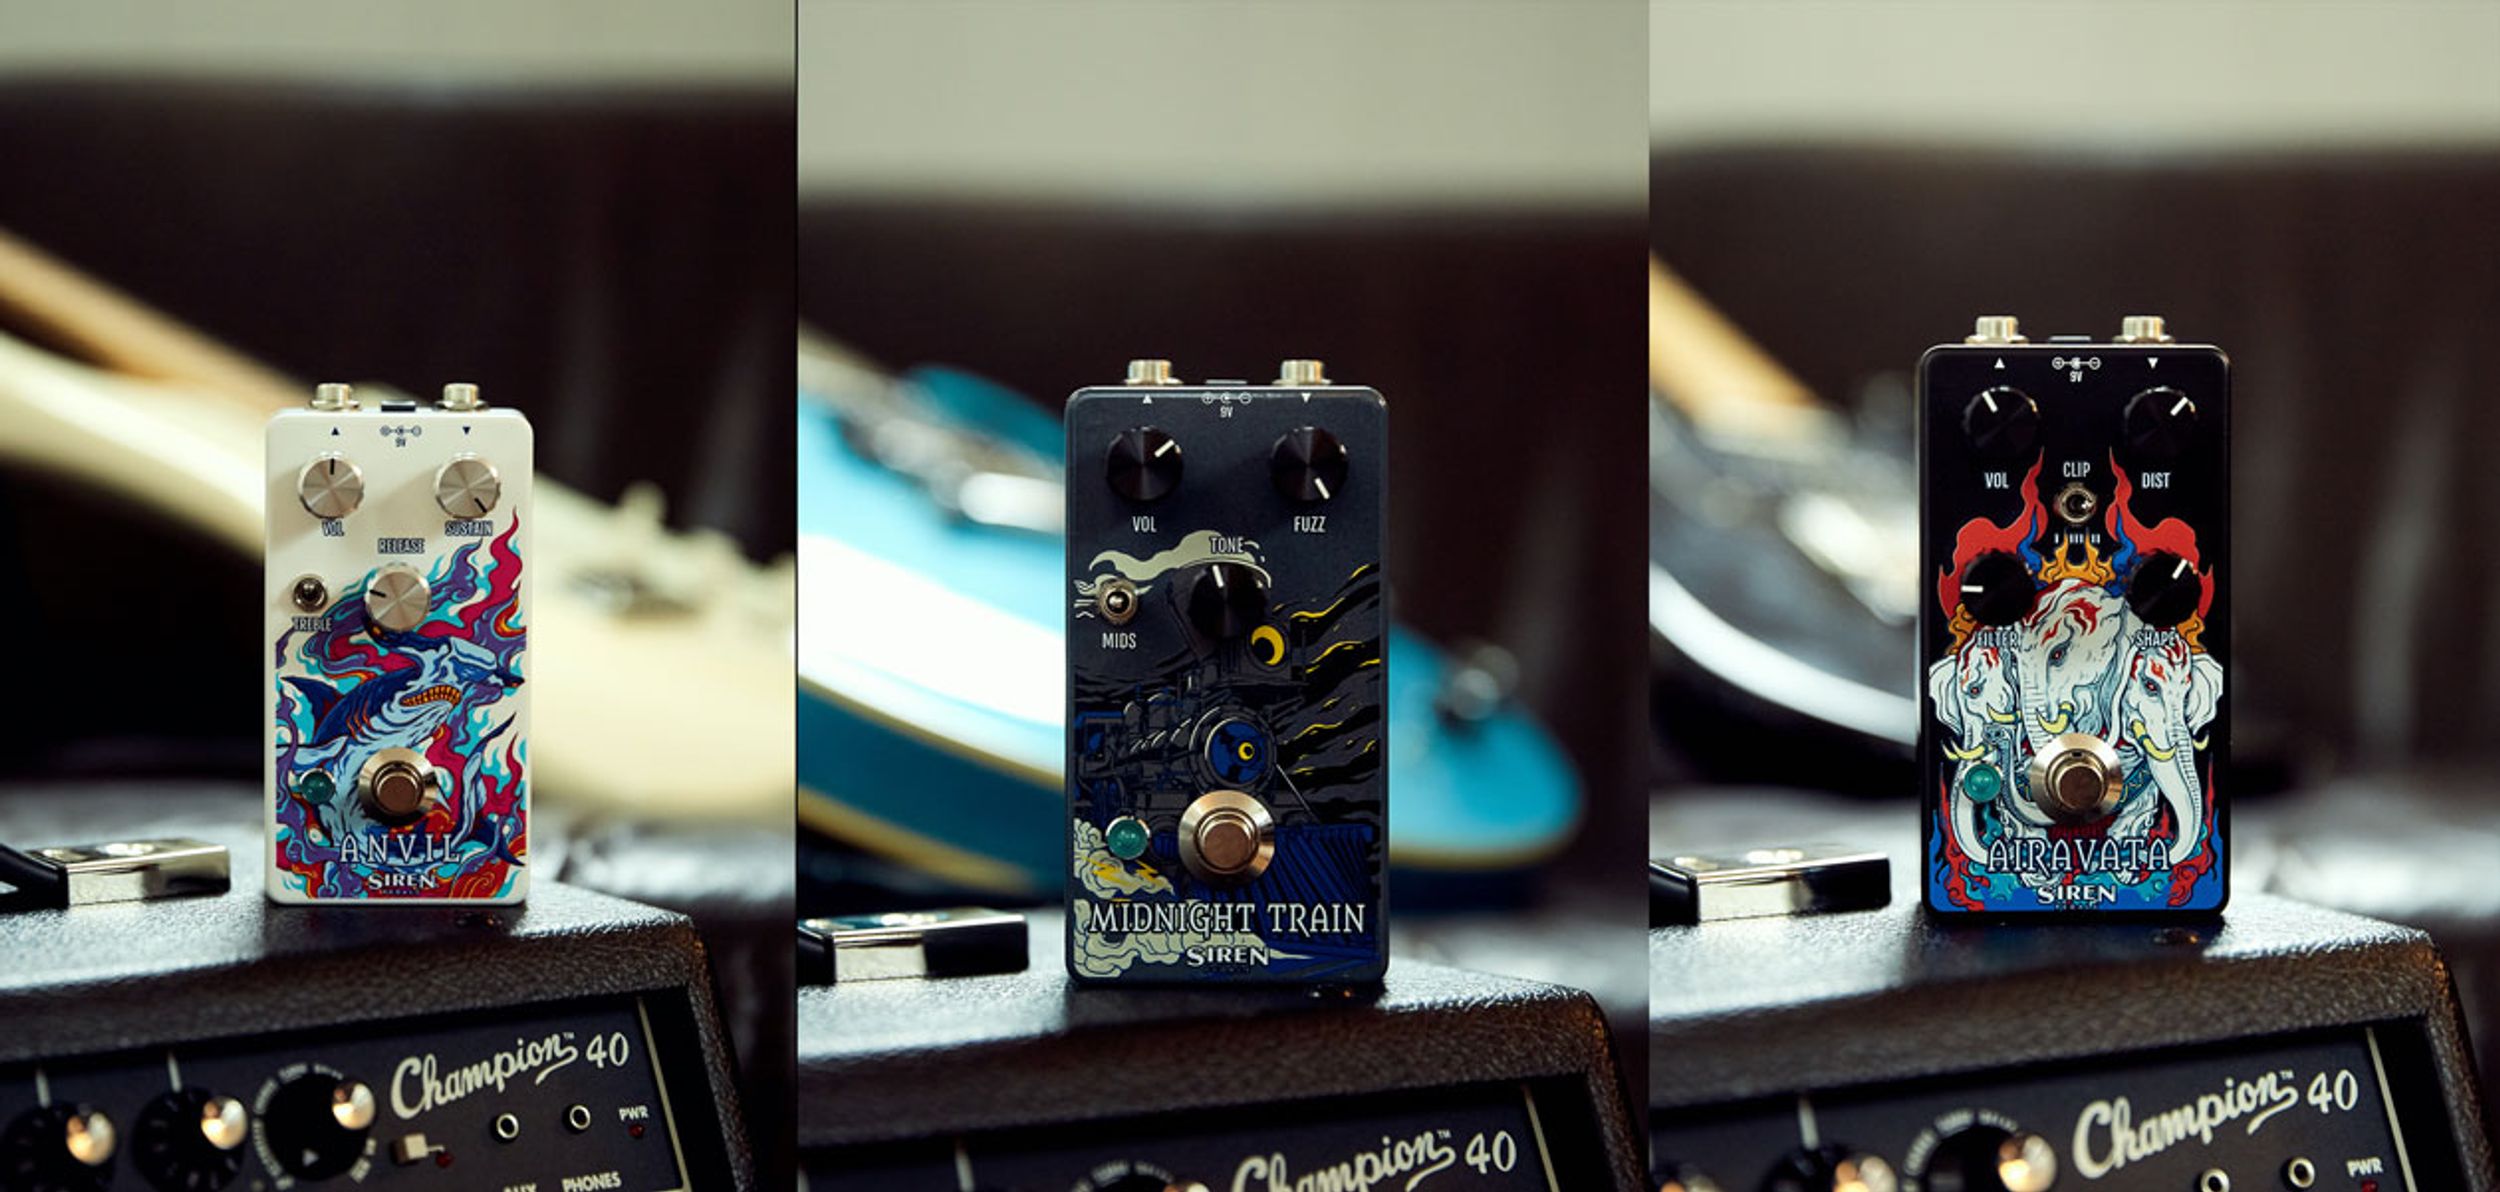 Siren Pedals Launches With the Airavata, Anvil, and Midnight Train